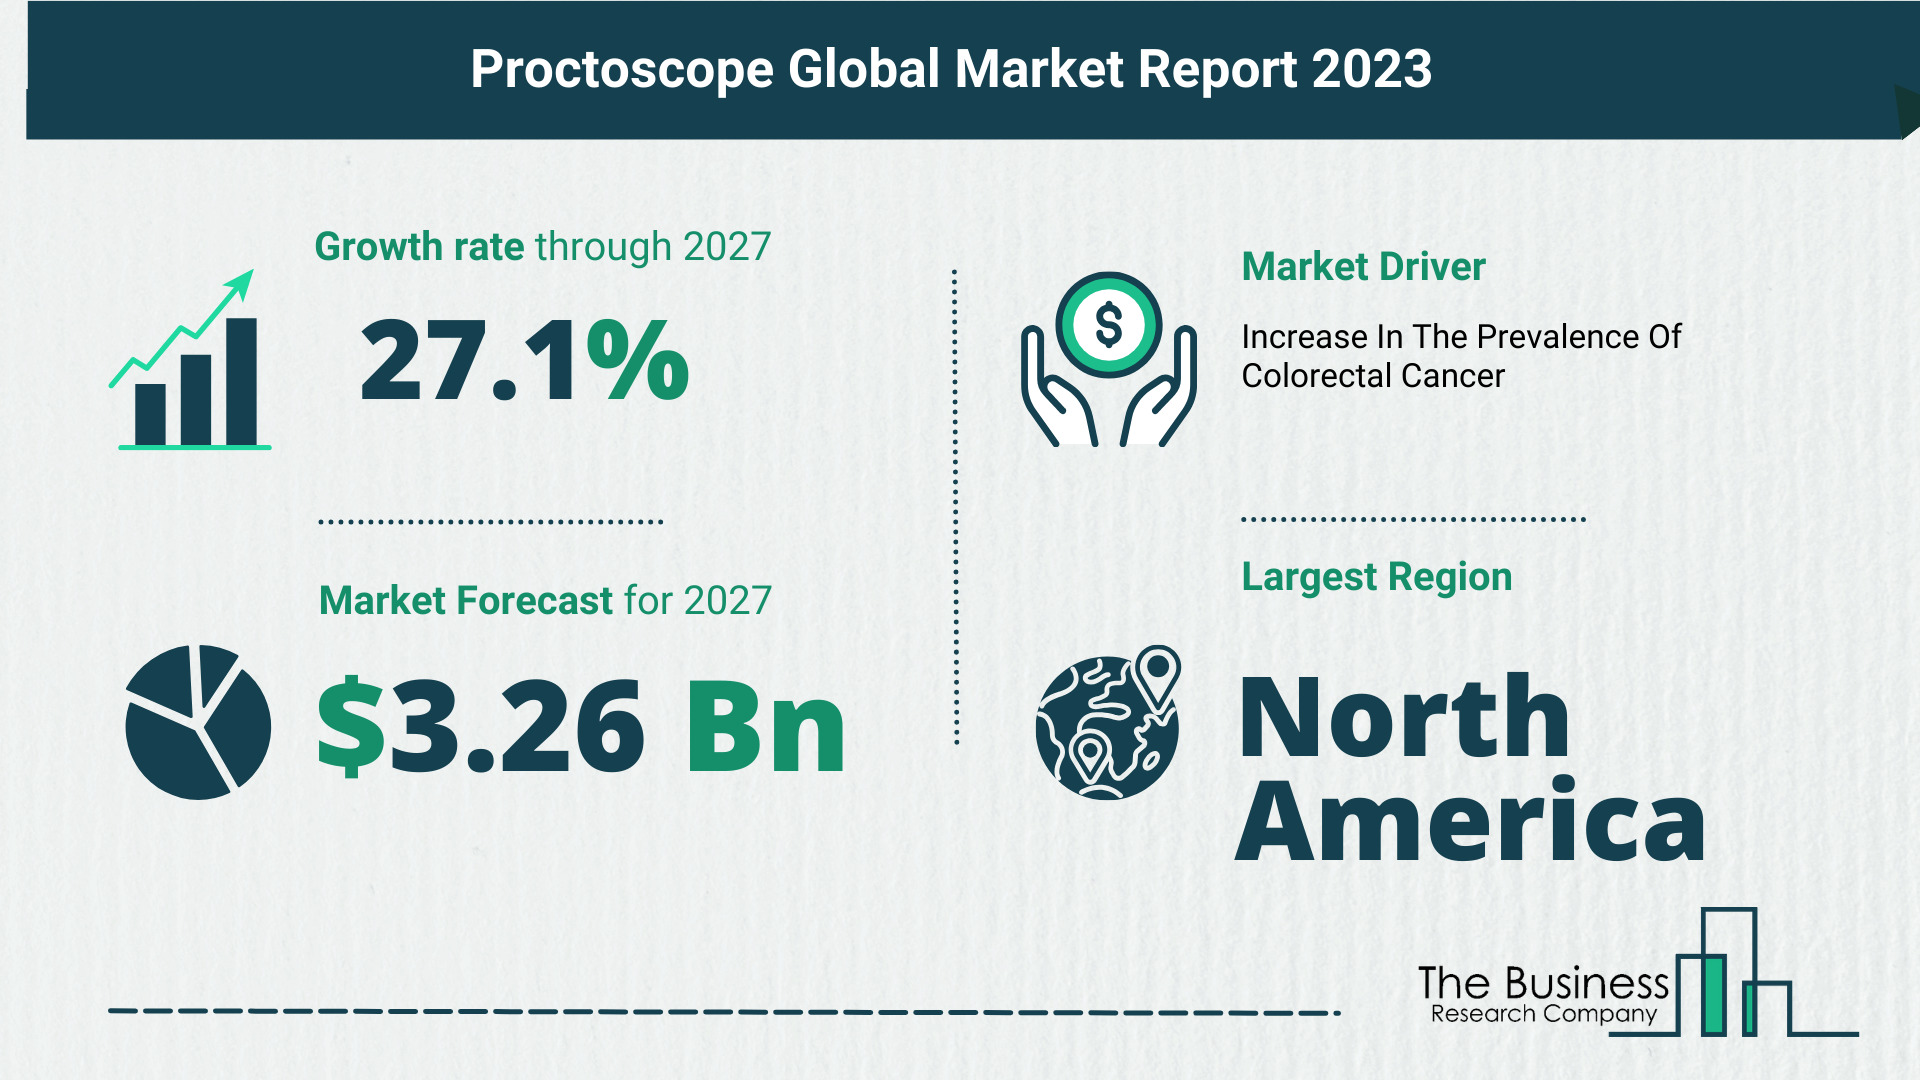 Key Trends And Drivers In The Proctoscope Market 2023